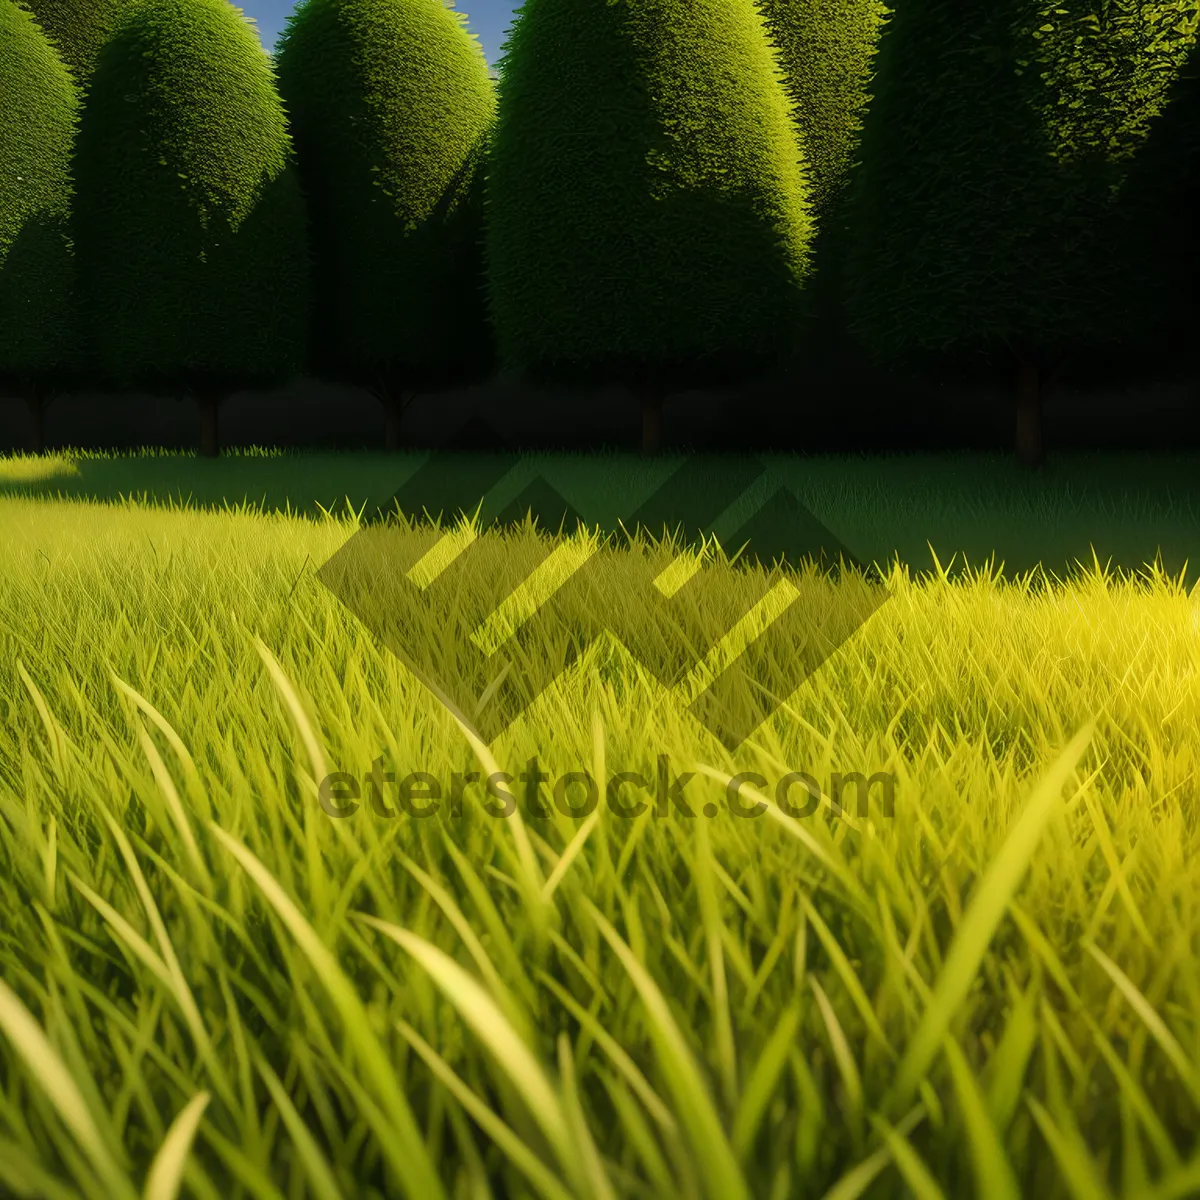 Picture of Vibrant Field of Lush Green Grass